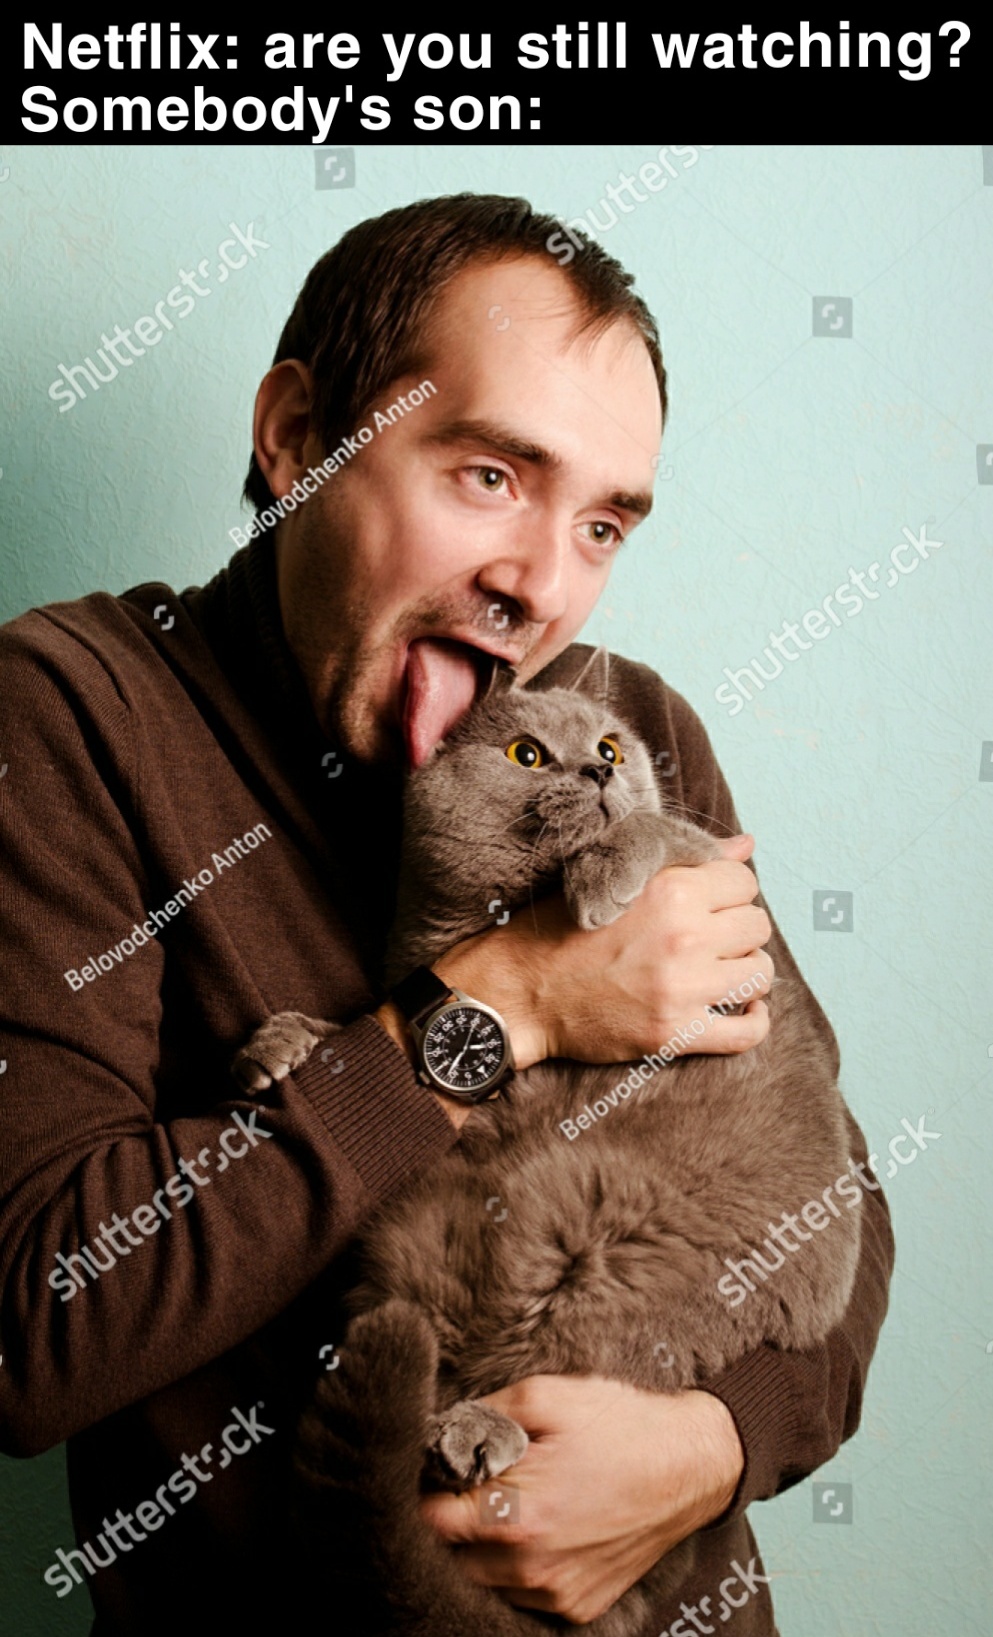 dank memes - guy licking cat - Netflix are you still watching? Somebody's son State shutterstock ovodchenko Anton shutterstock Belovodchenko Anton Belowe shutterstock shutterstock shutterstock stock